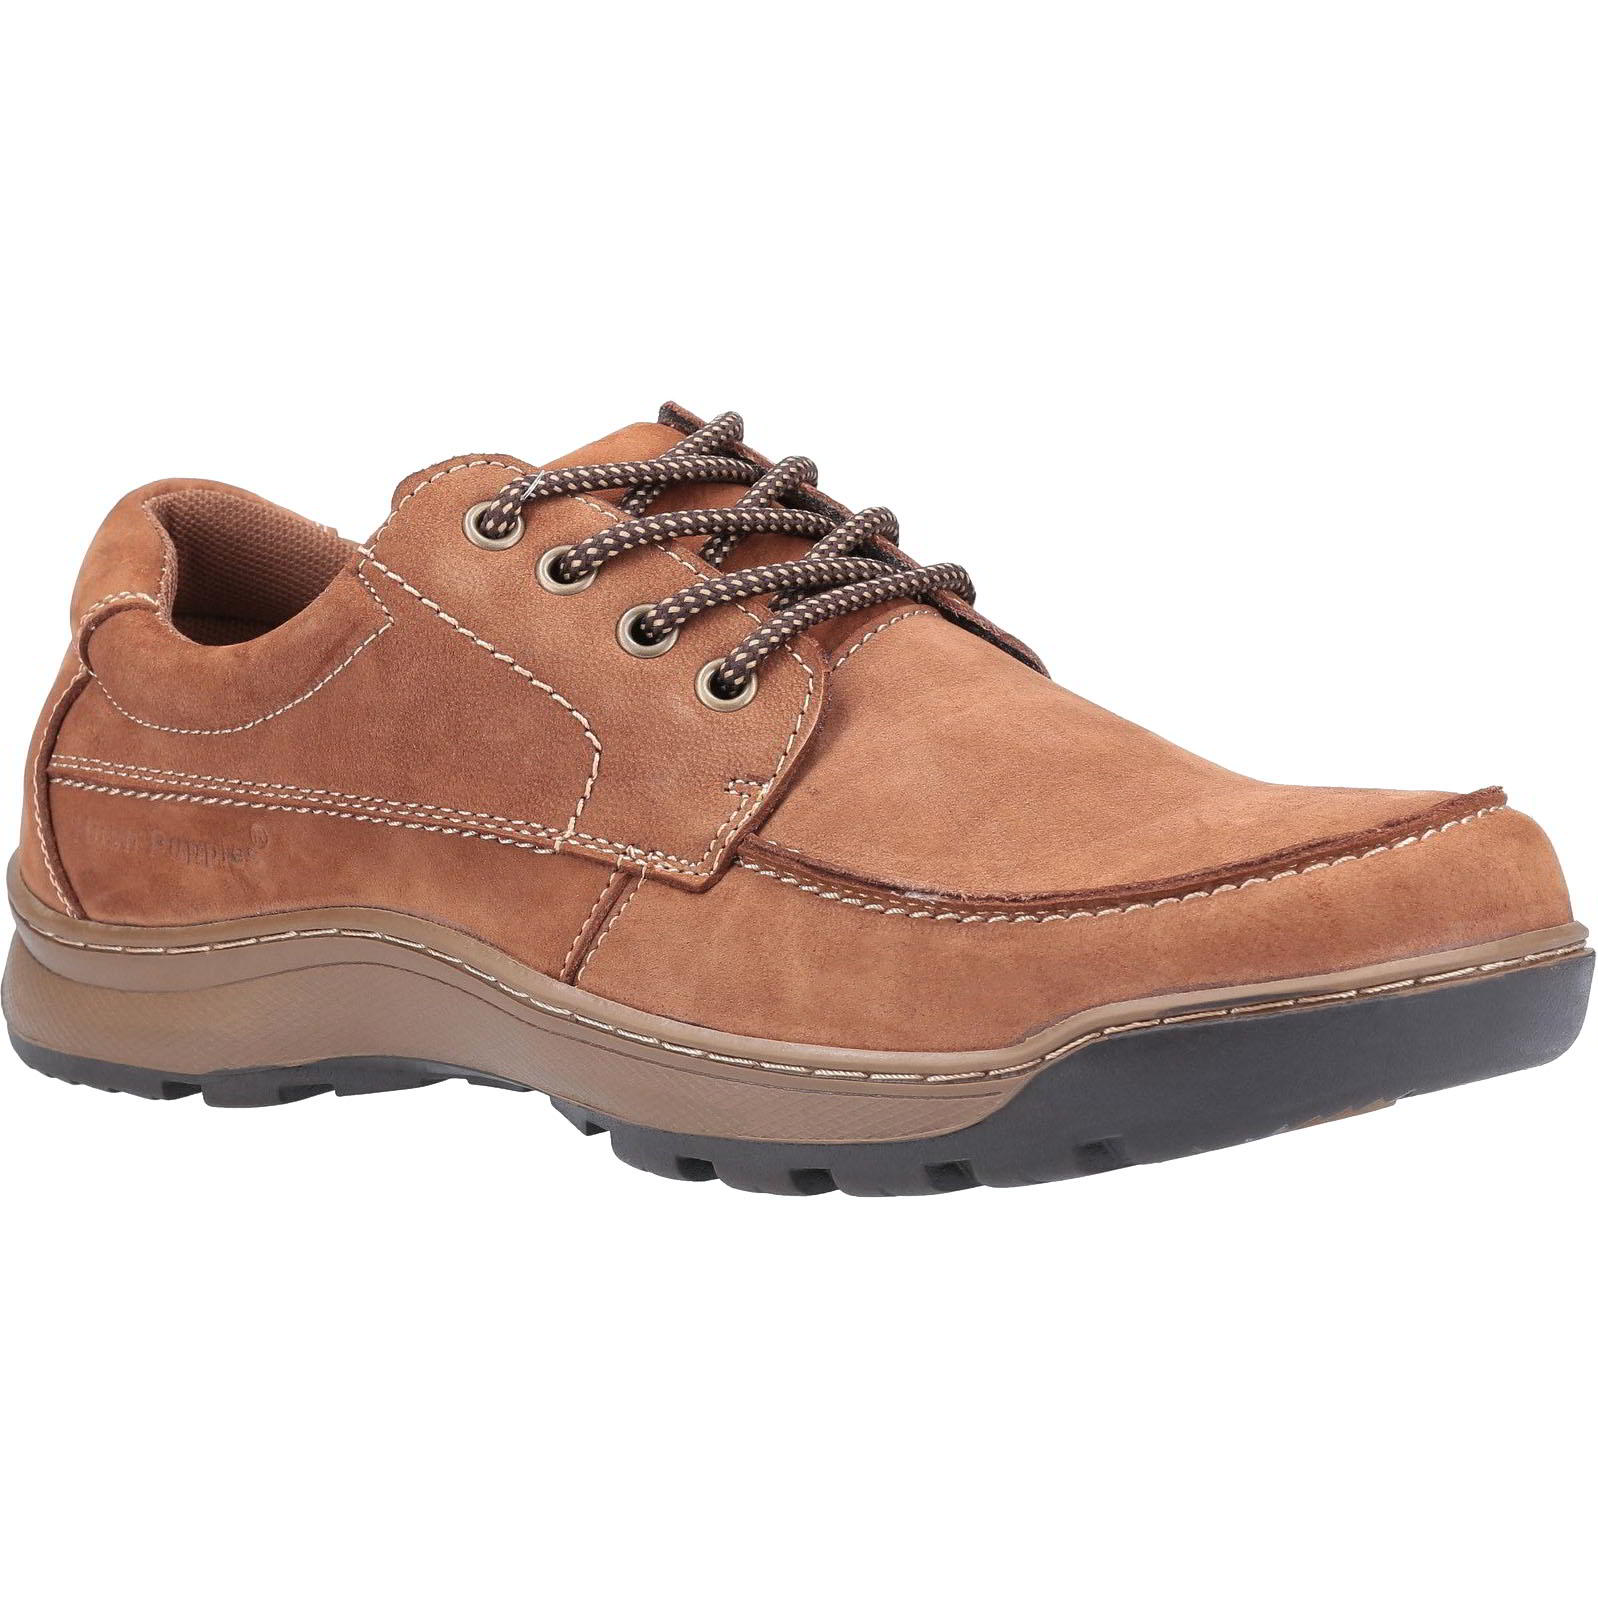 Hush Puppies Men's Tucker Leather Lace Up Shoes - UK 8